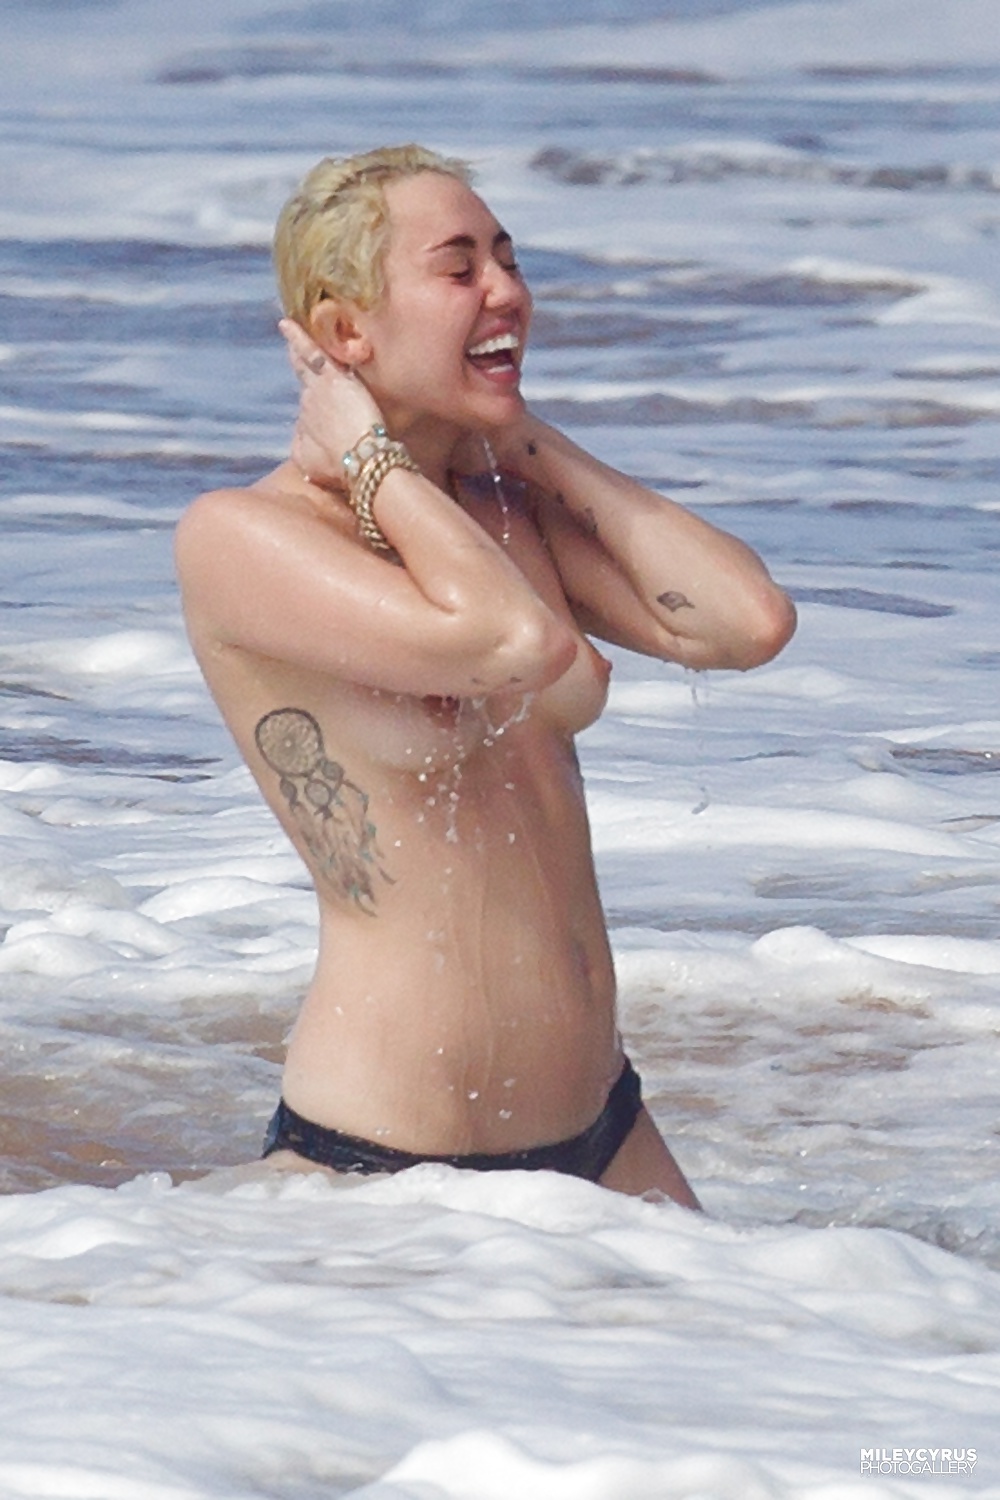 Miley cyrus topless in australia